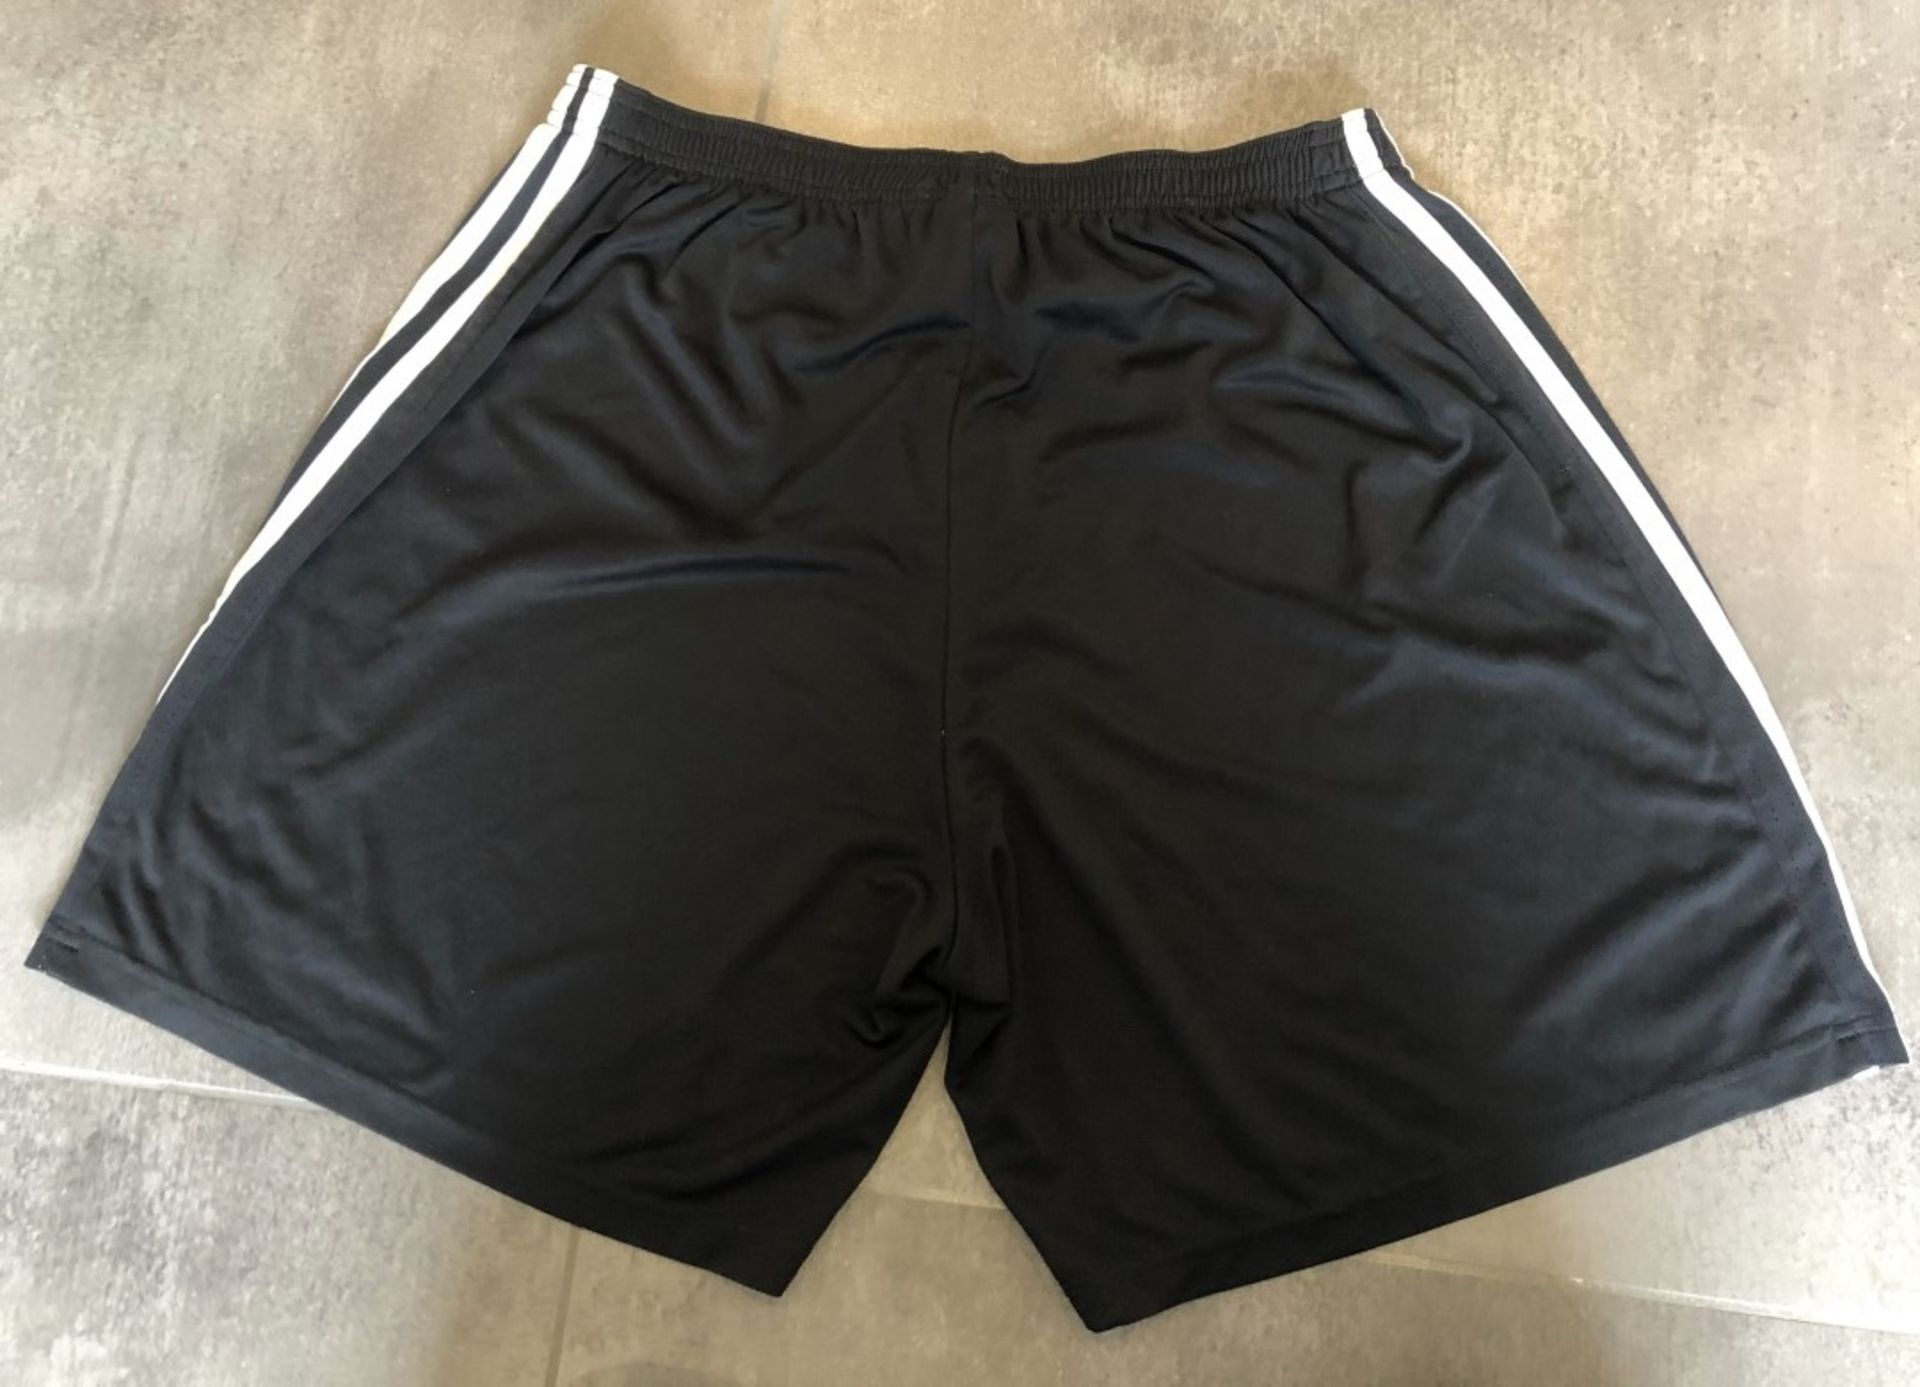 4 x Assorted Pairs Of Men's Genuine Adidas Shorts - AllIn Black - Sizes: L-XL - Preowned - Image 19 of 23